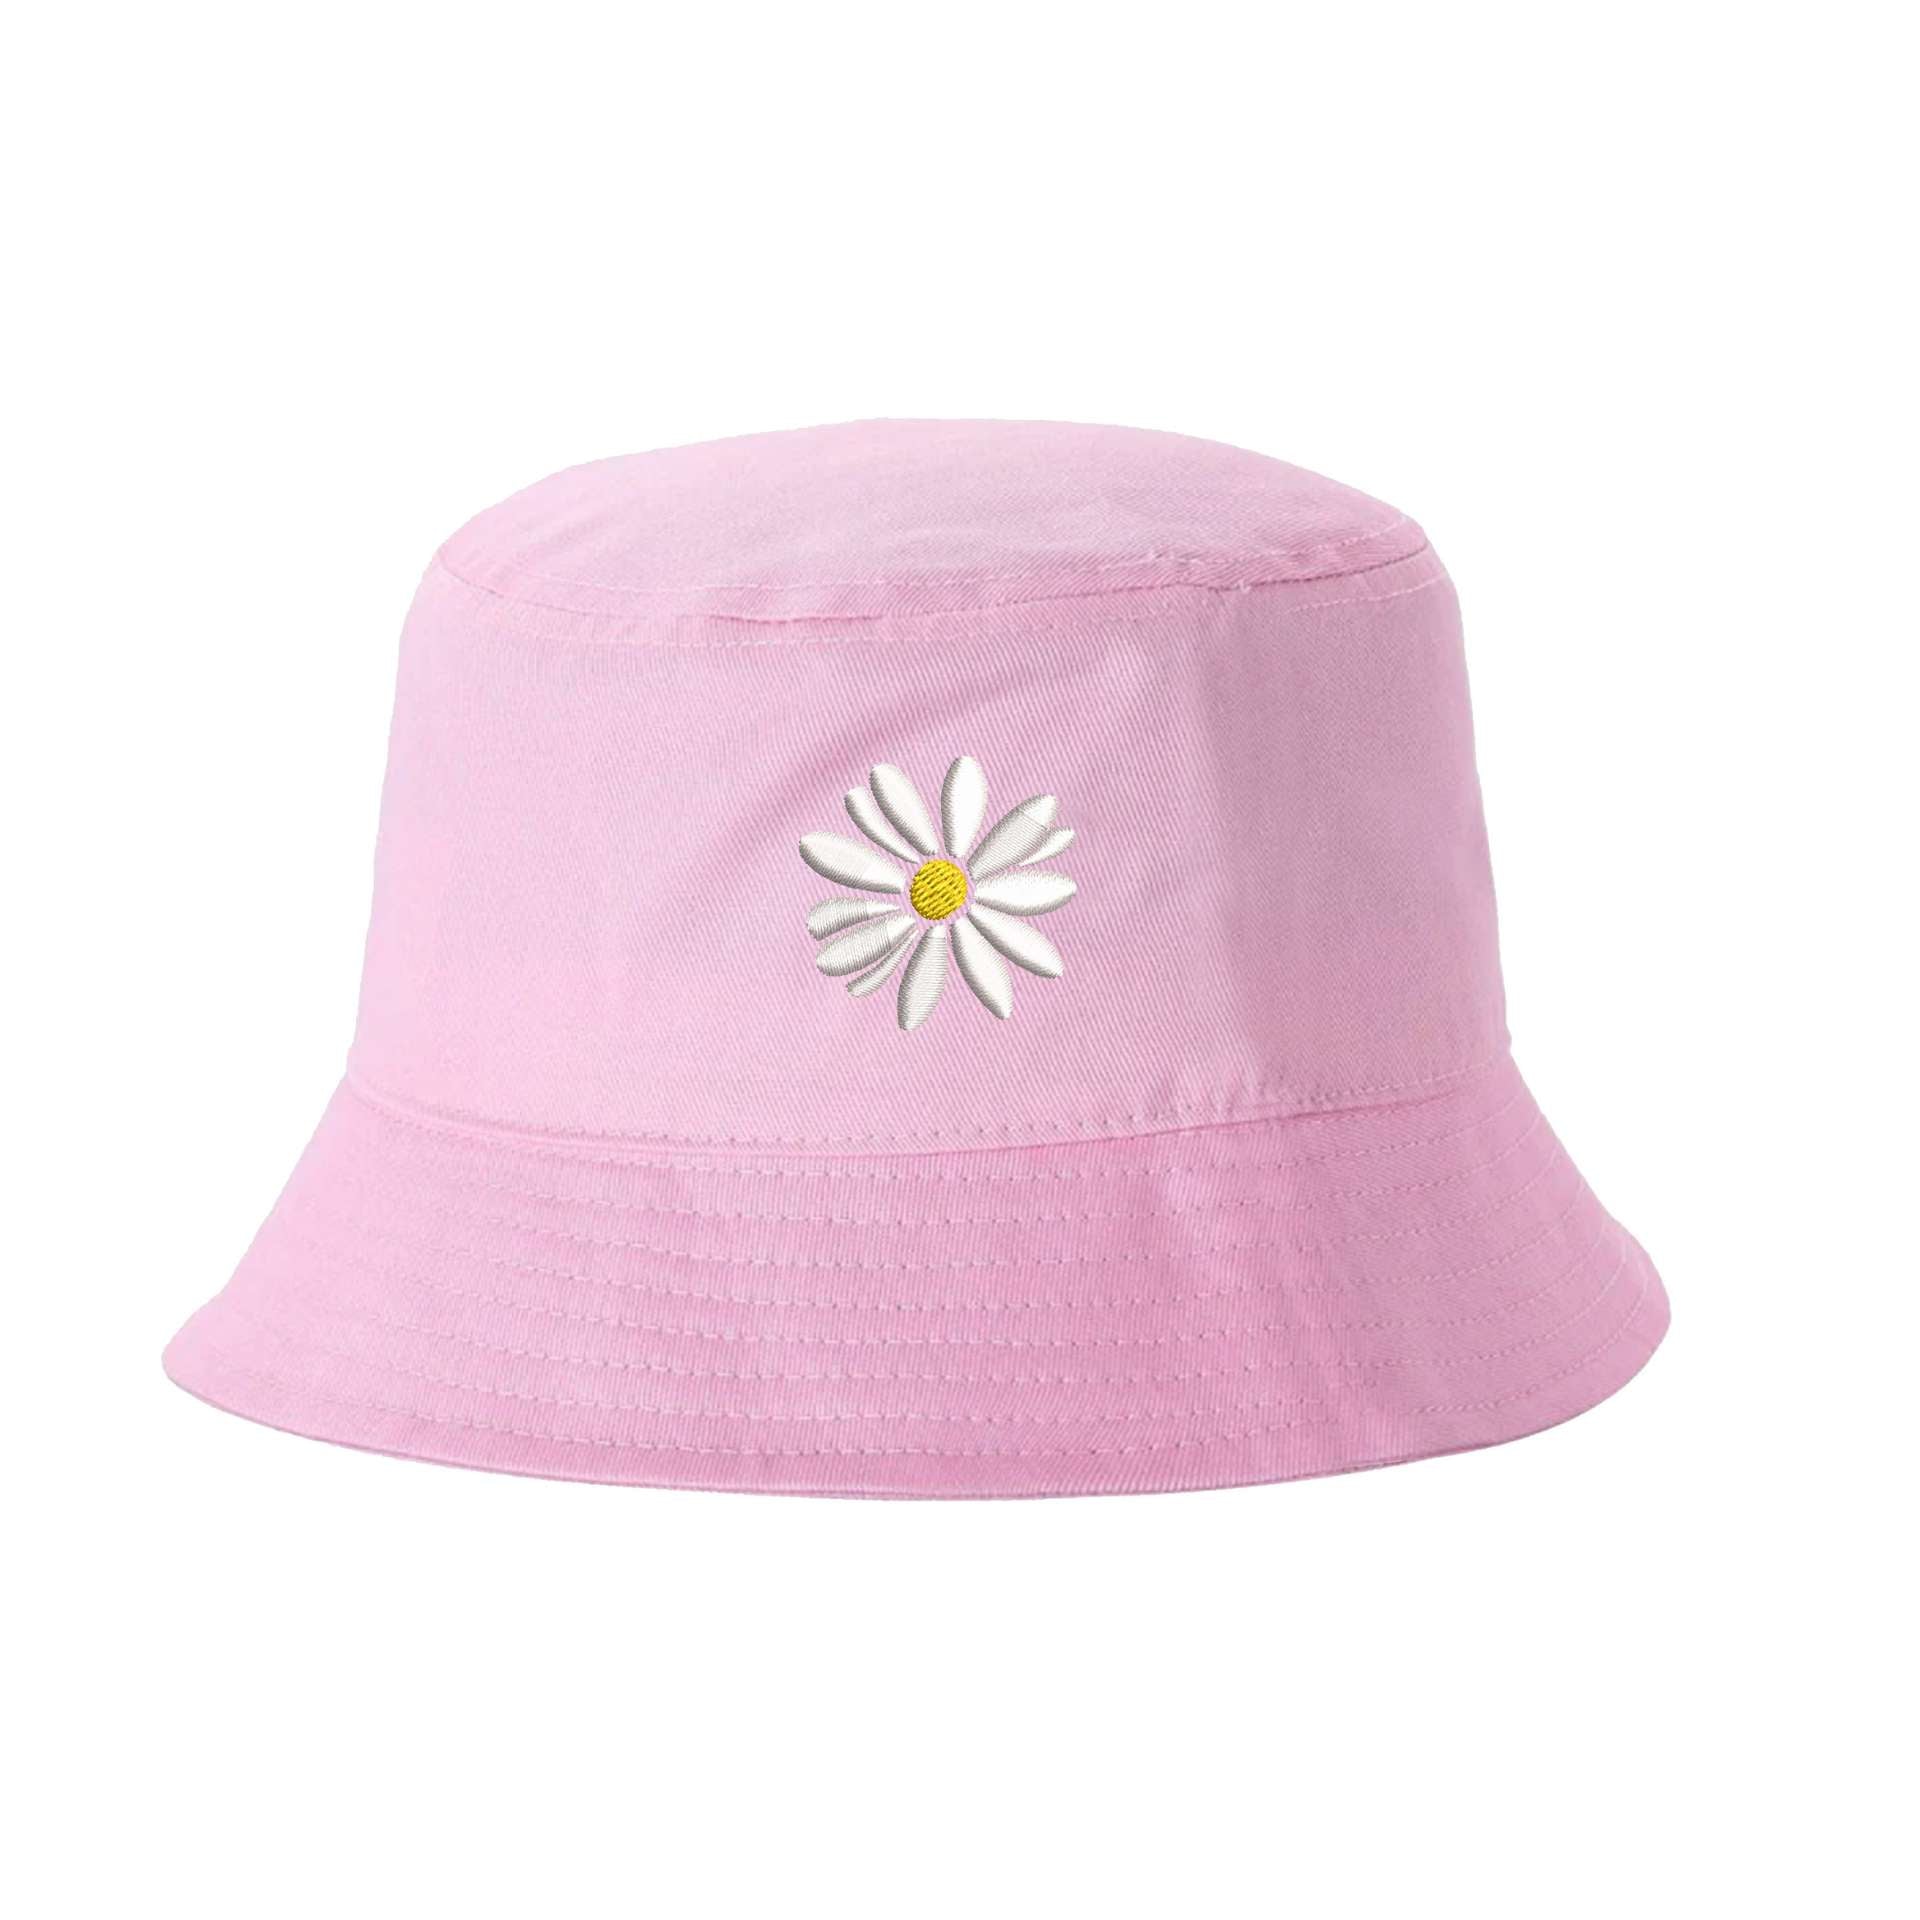 Light Pink Bucket hat embroidered with a daisy flower - DSY Lifestyle